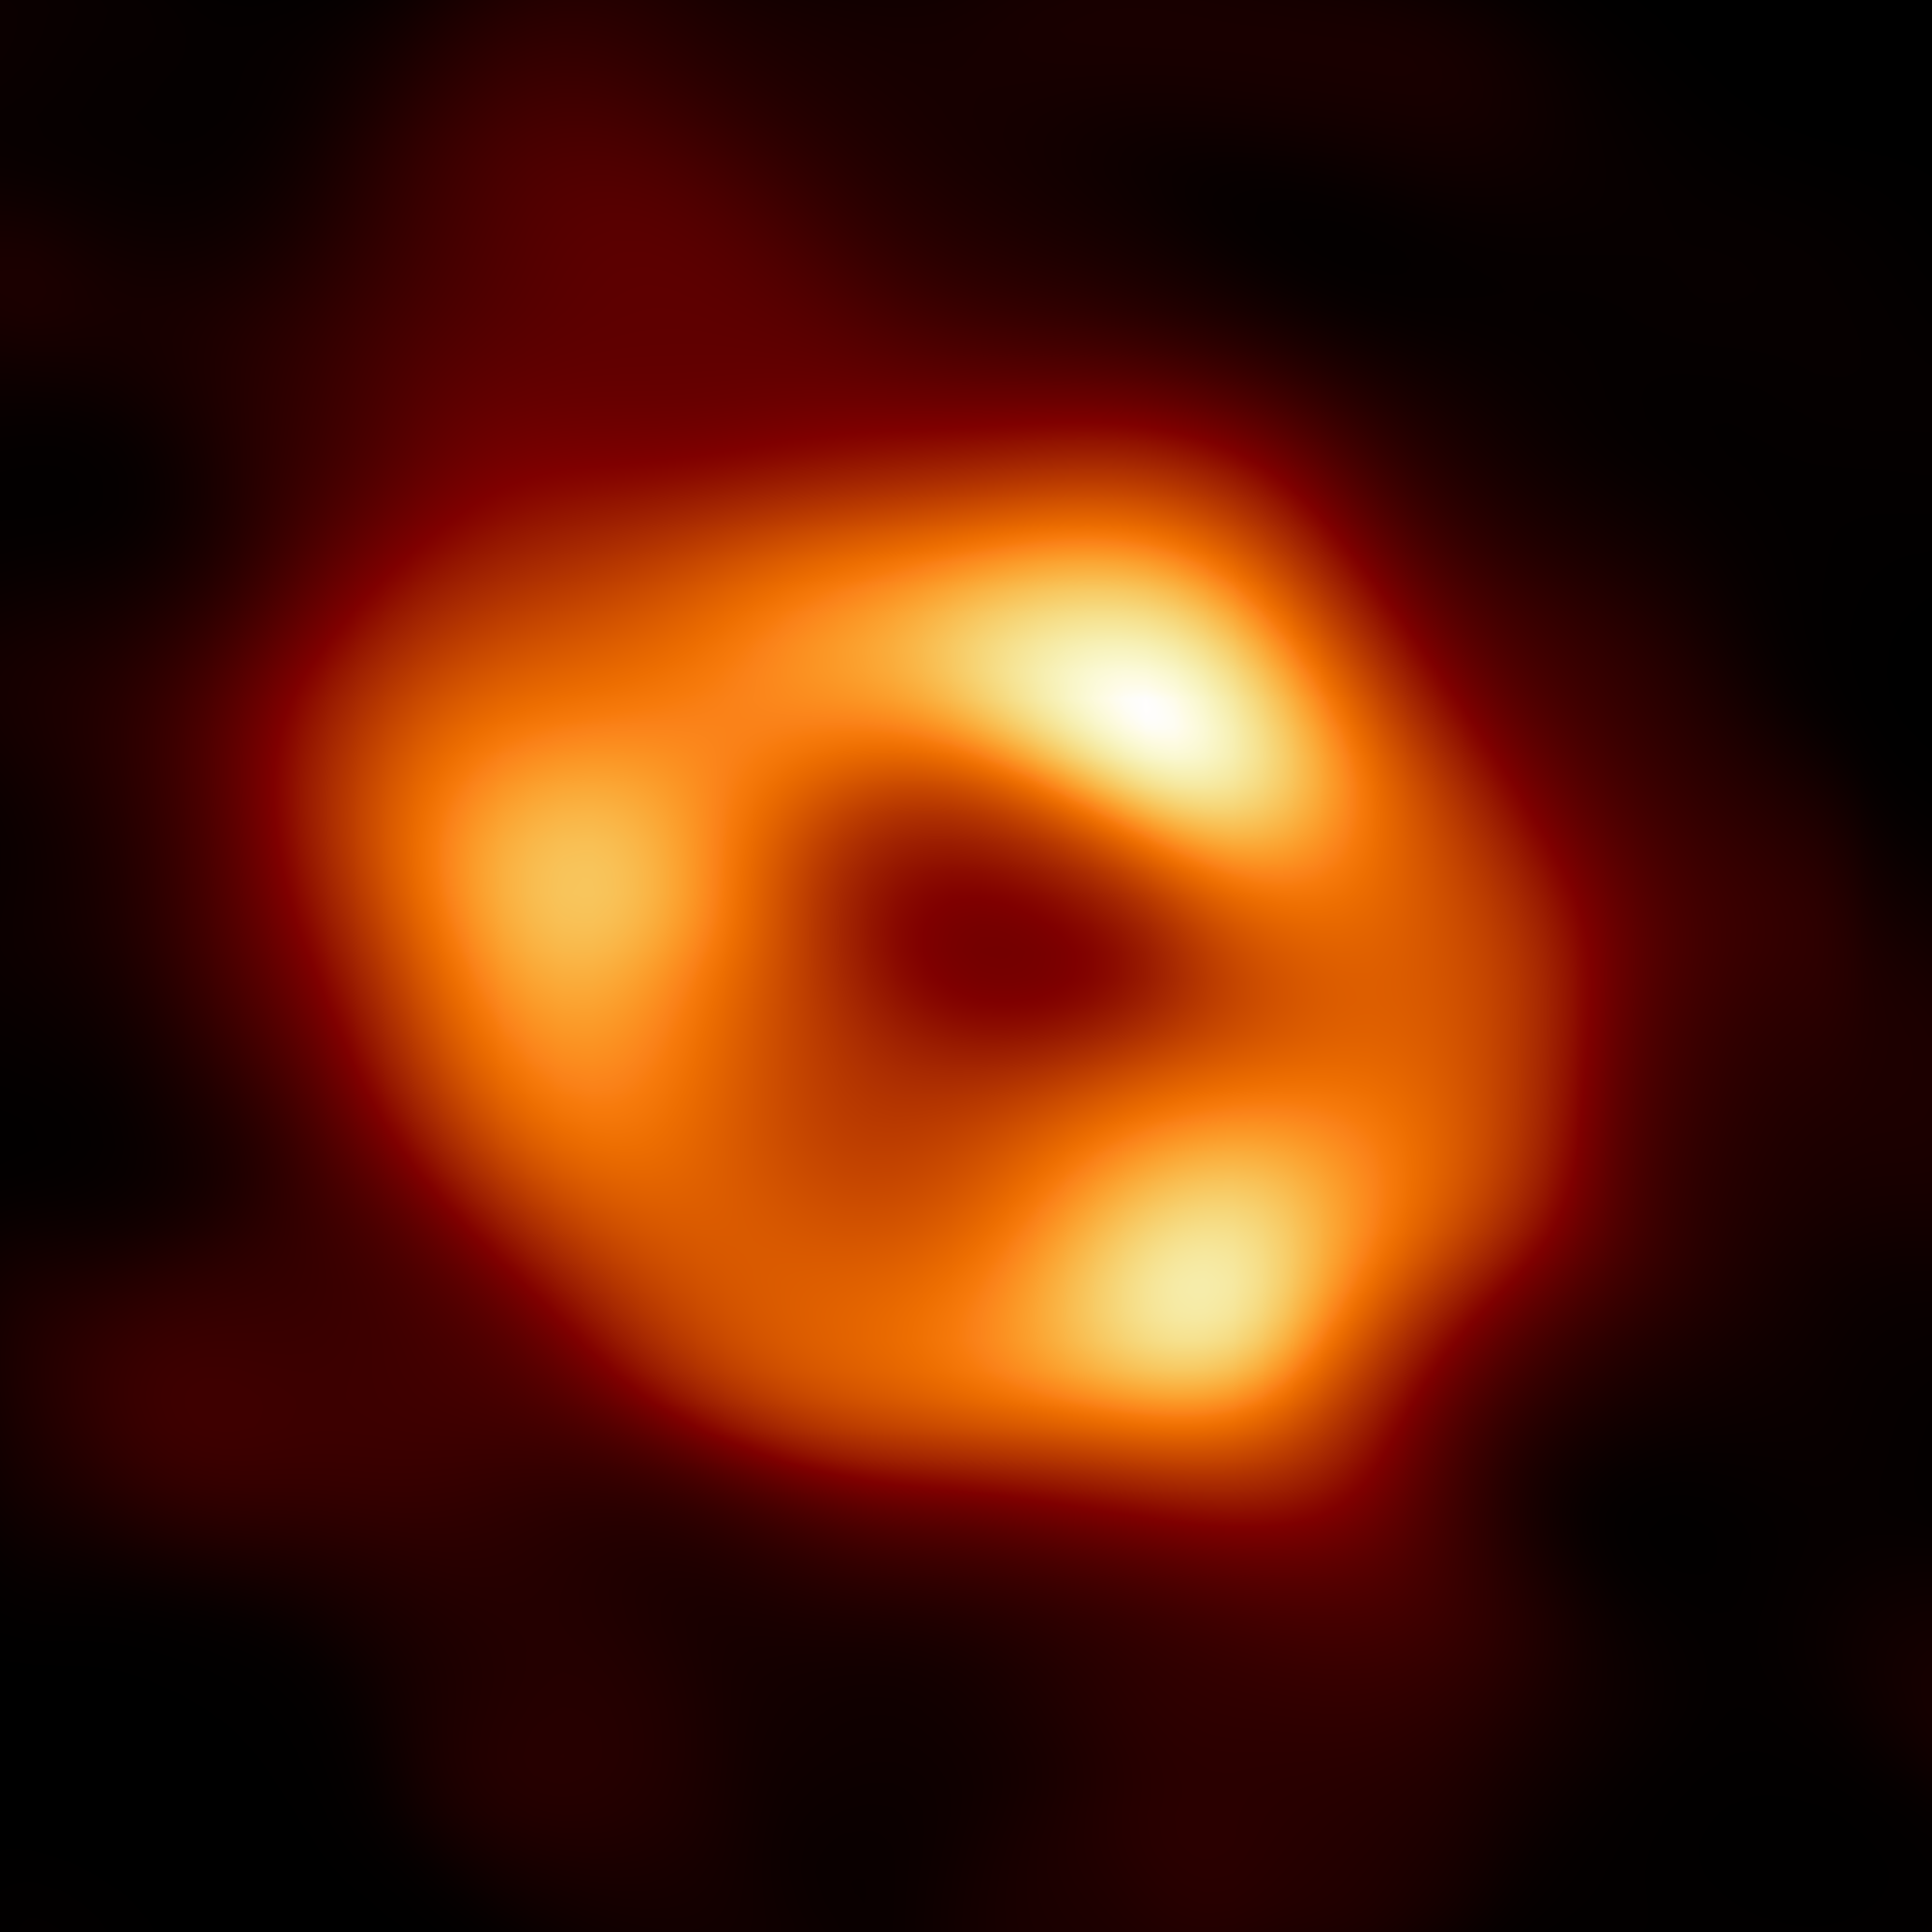 The first image of the supermassive black hole in the center of the Milky Way - Sagittarius A*. Credit: ESA